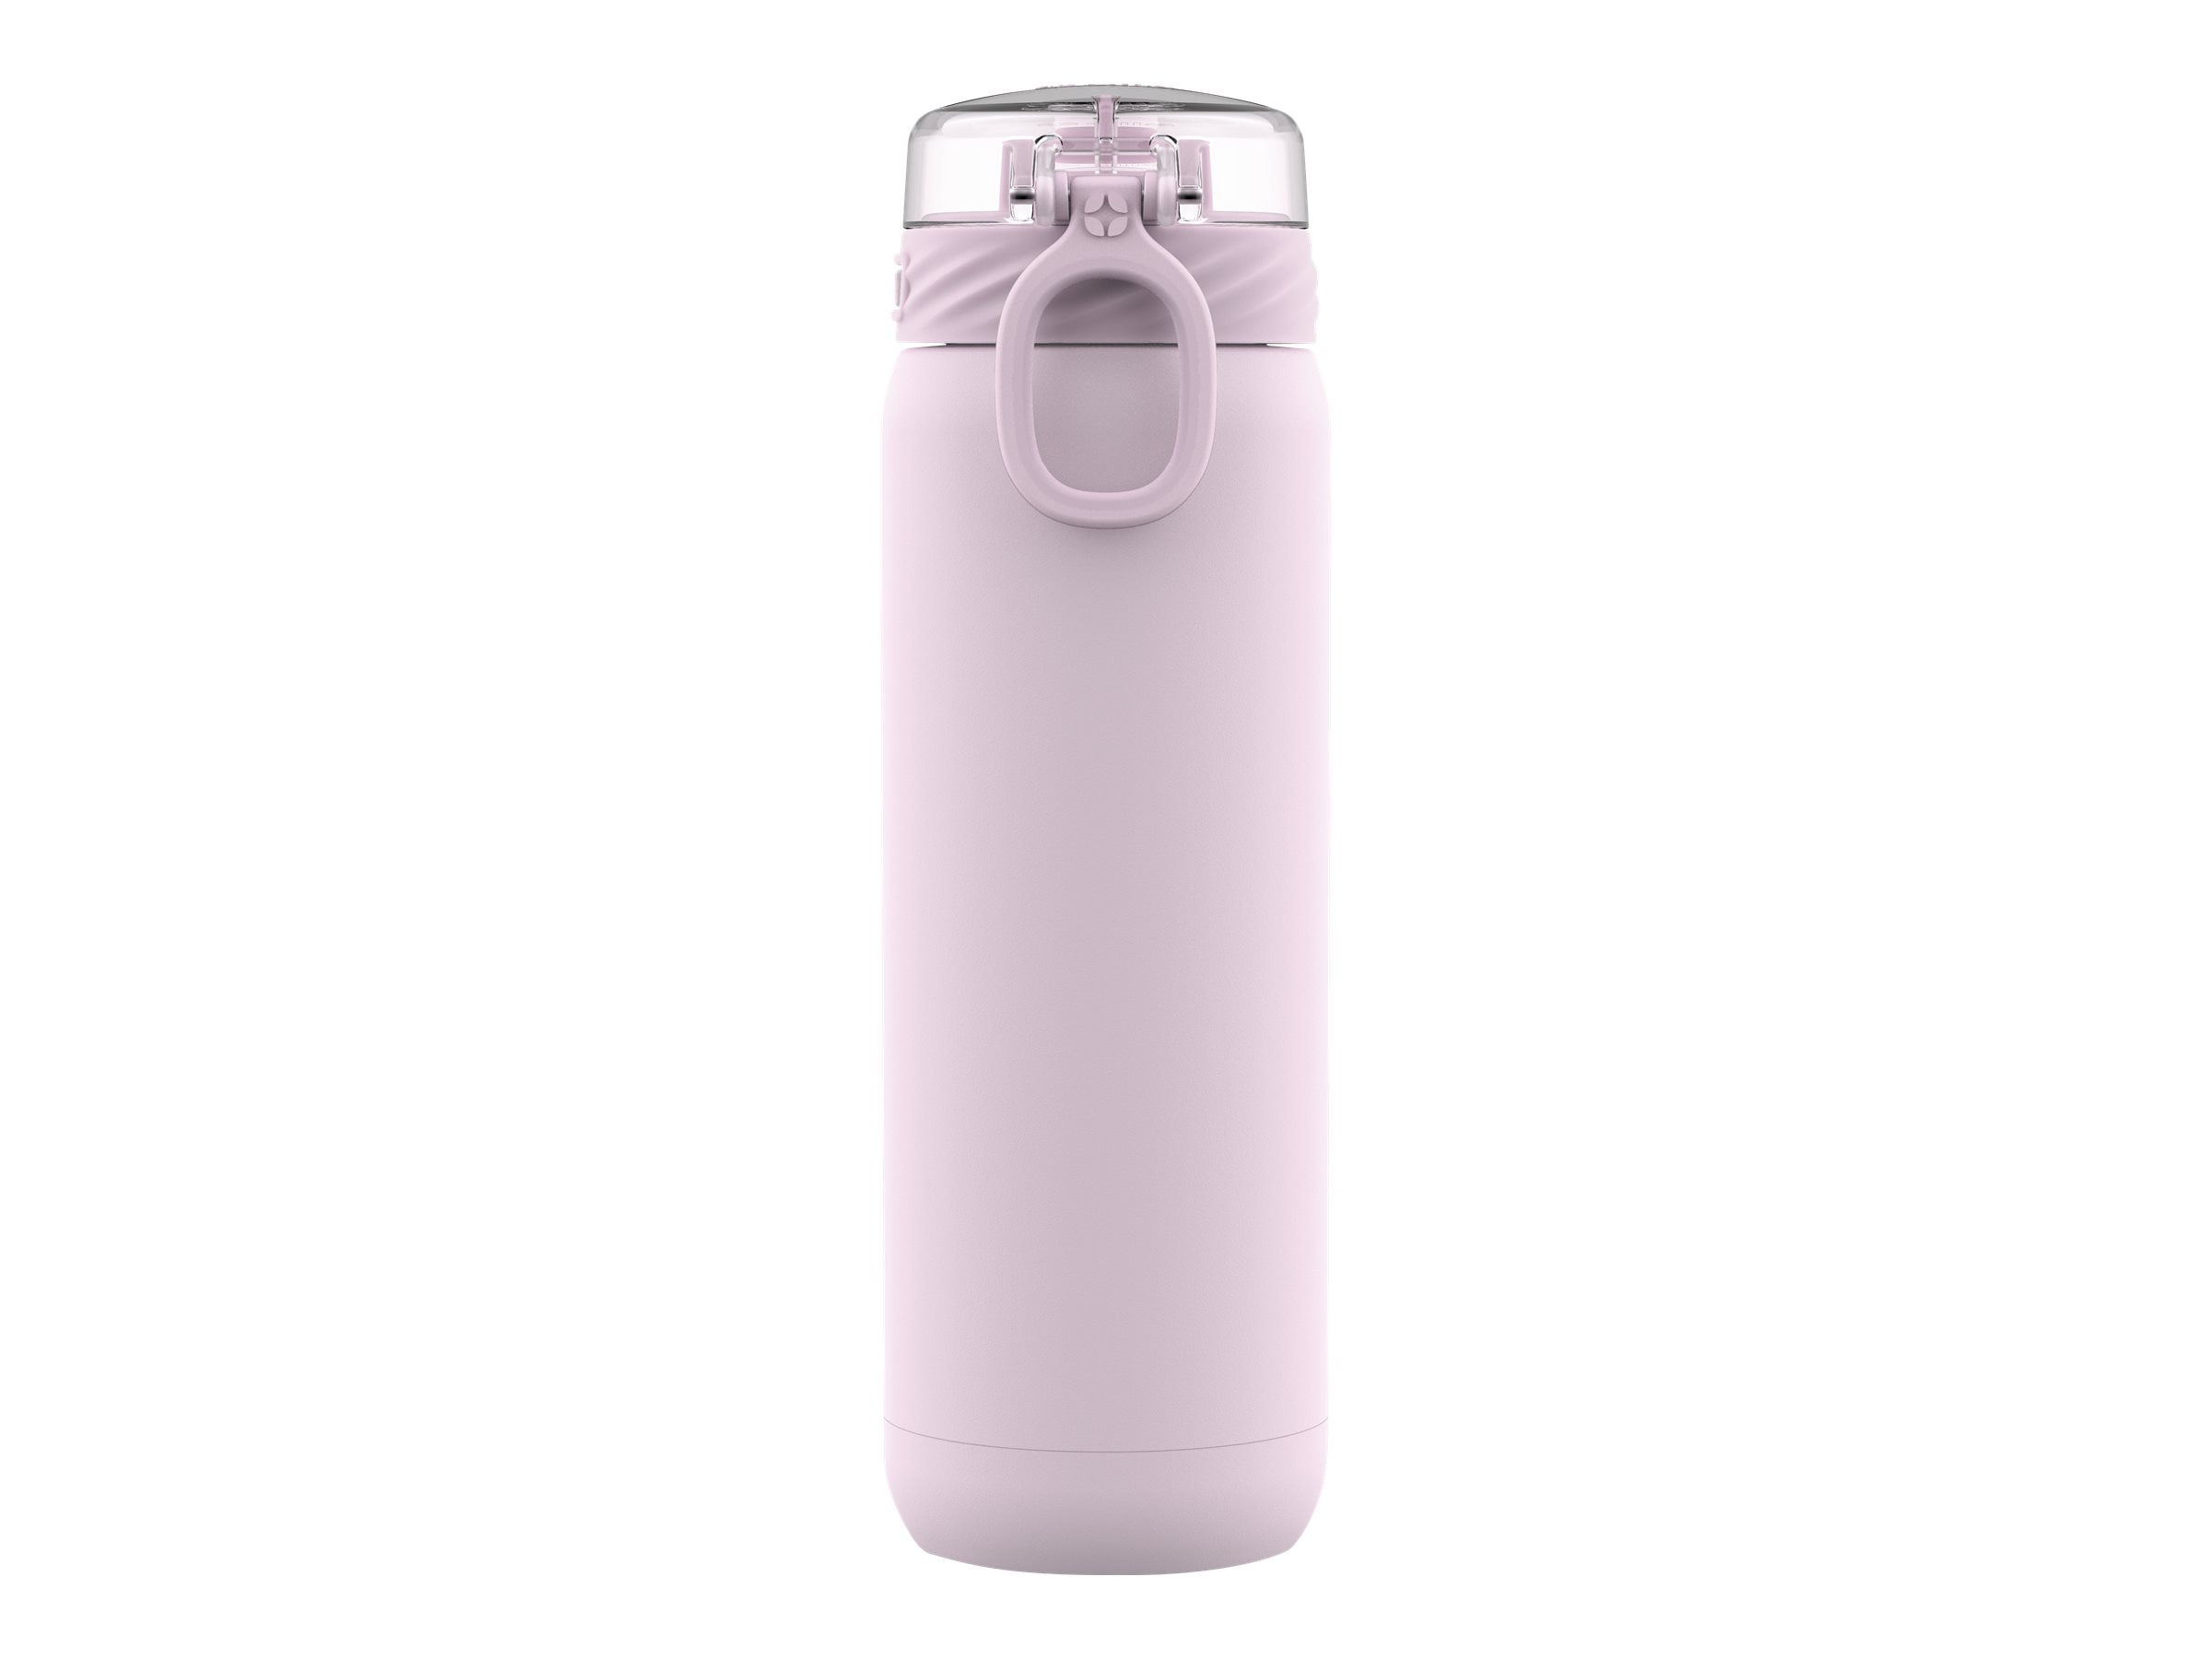 Ello Cooper Stainless Steel 22 oz Cup in Pink, 1 ct - Kroger